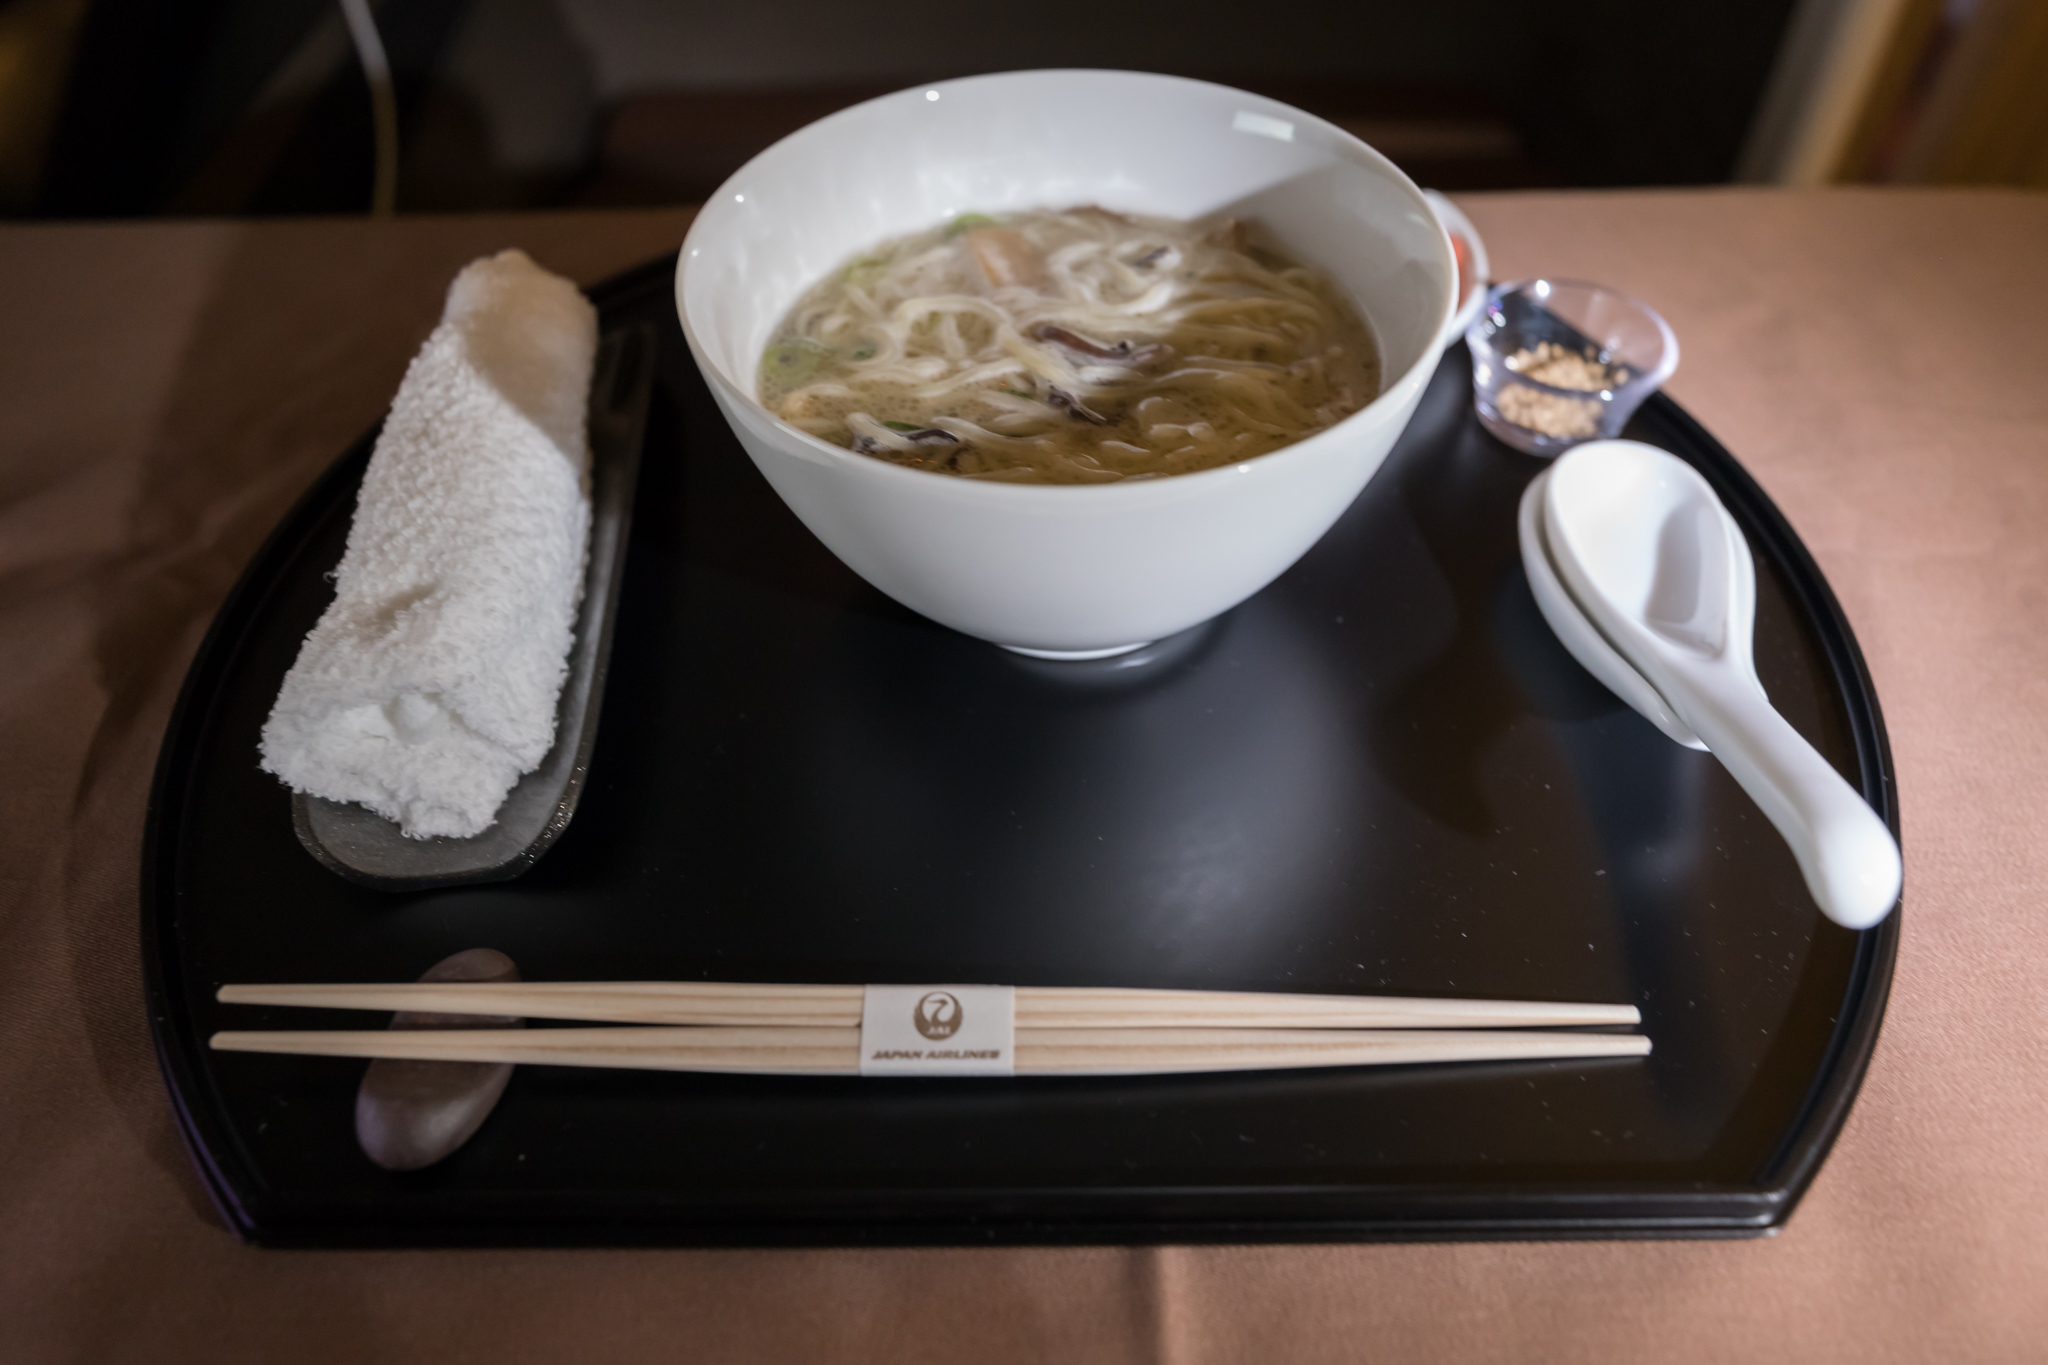 a bowl of soup and chopsticks on a tray